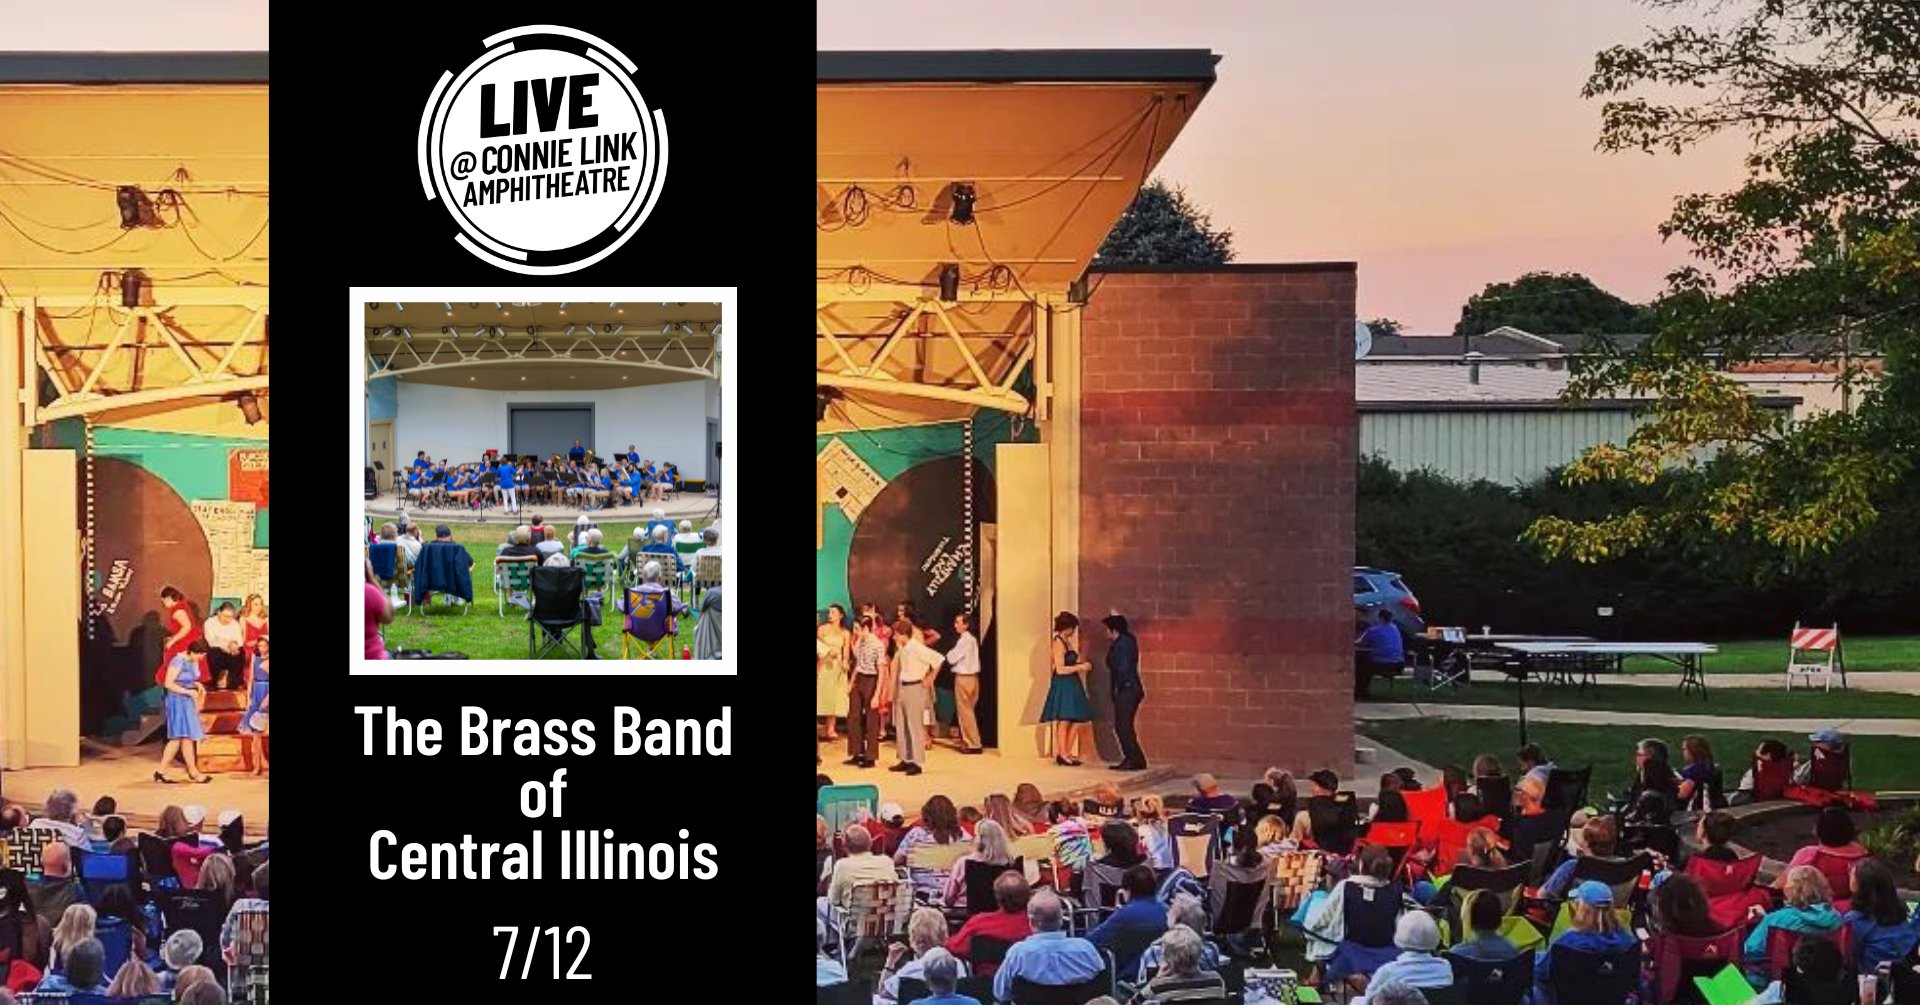 Normal LIVE presents Brass Band of Central Illinois @ Connie Link Amphitheatre